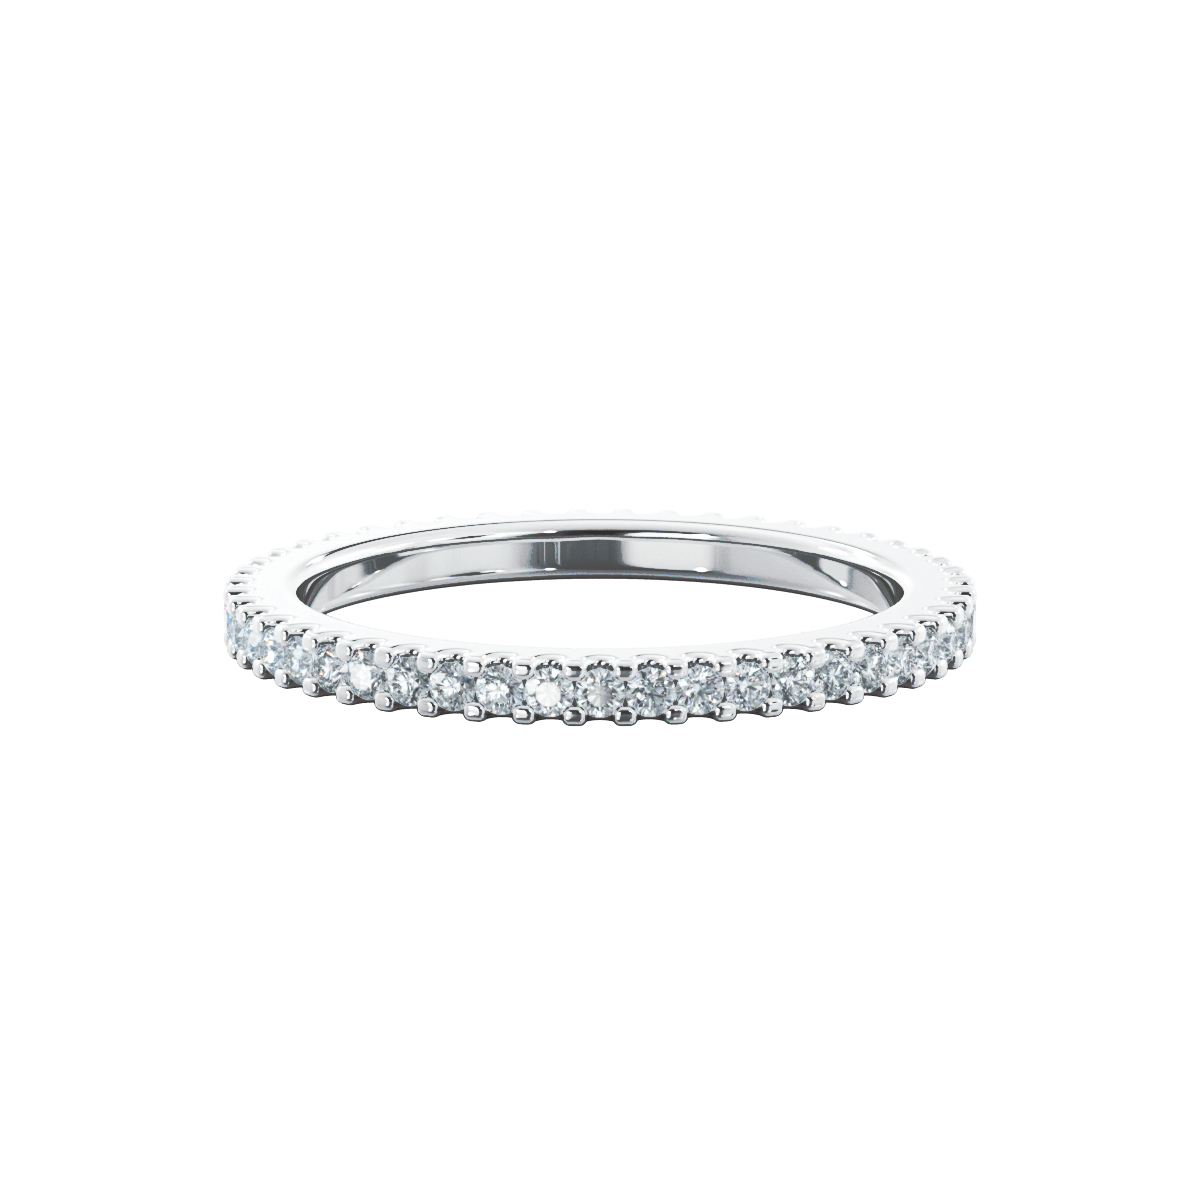 You and Me (0,01) – LWL Jewelry